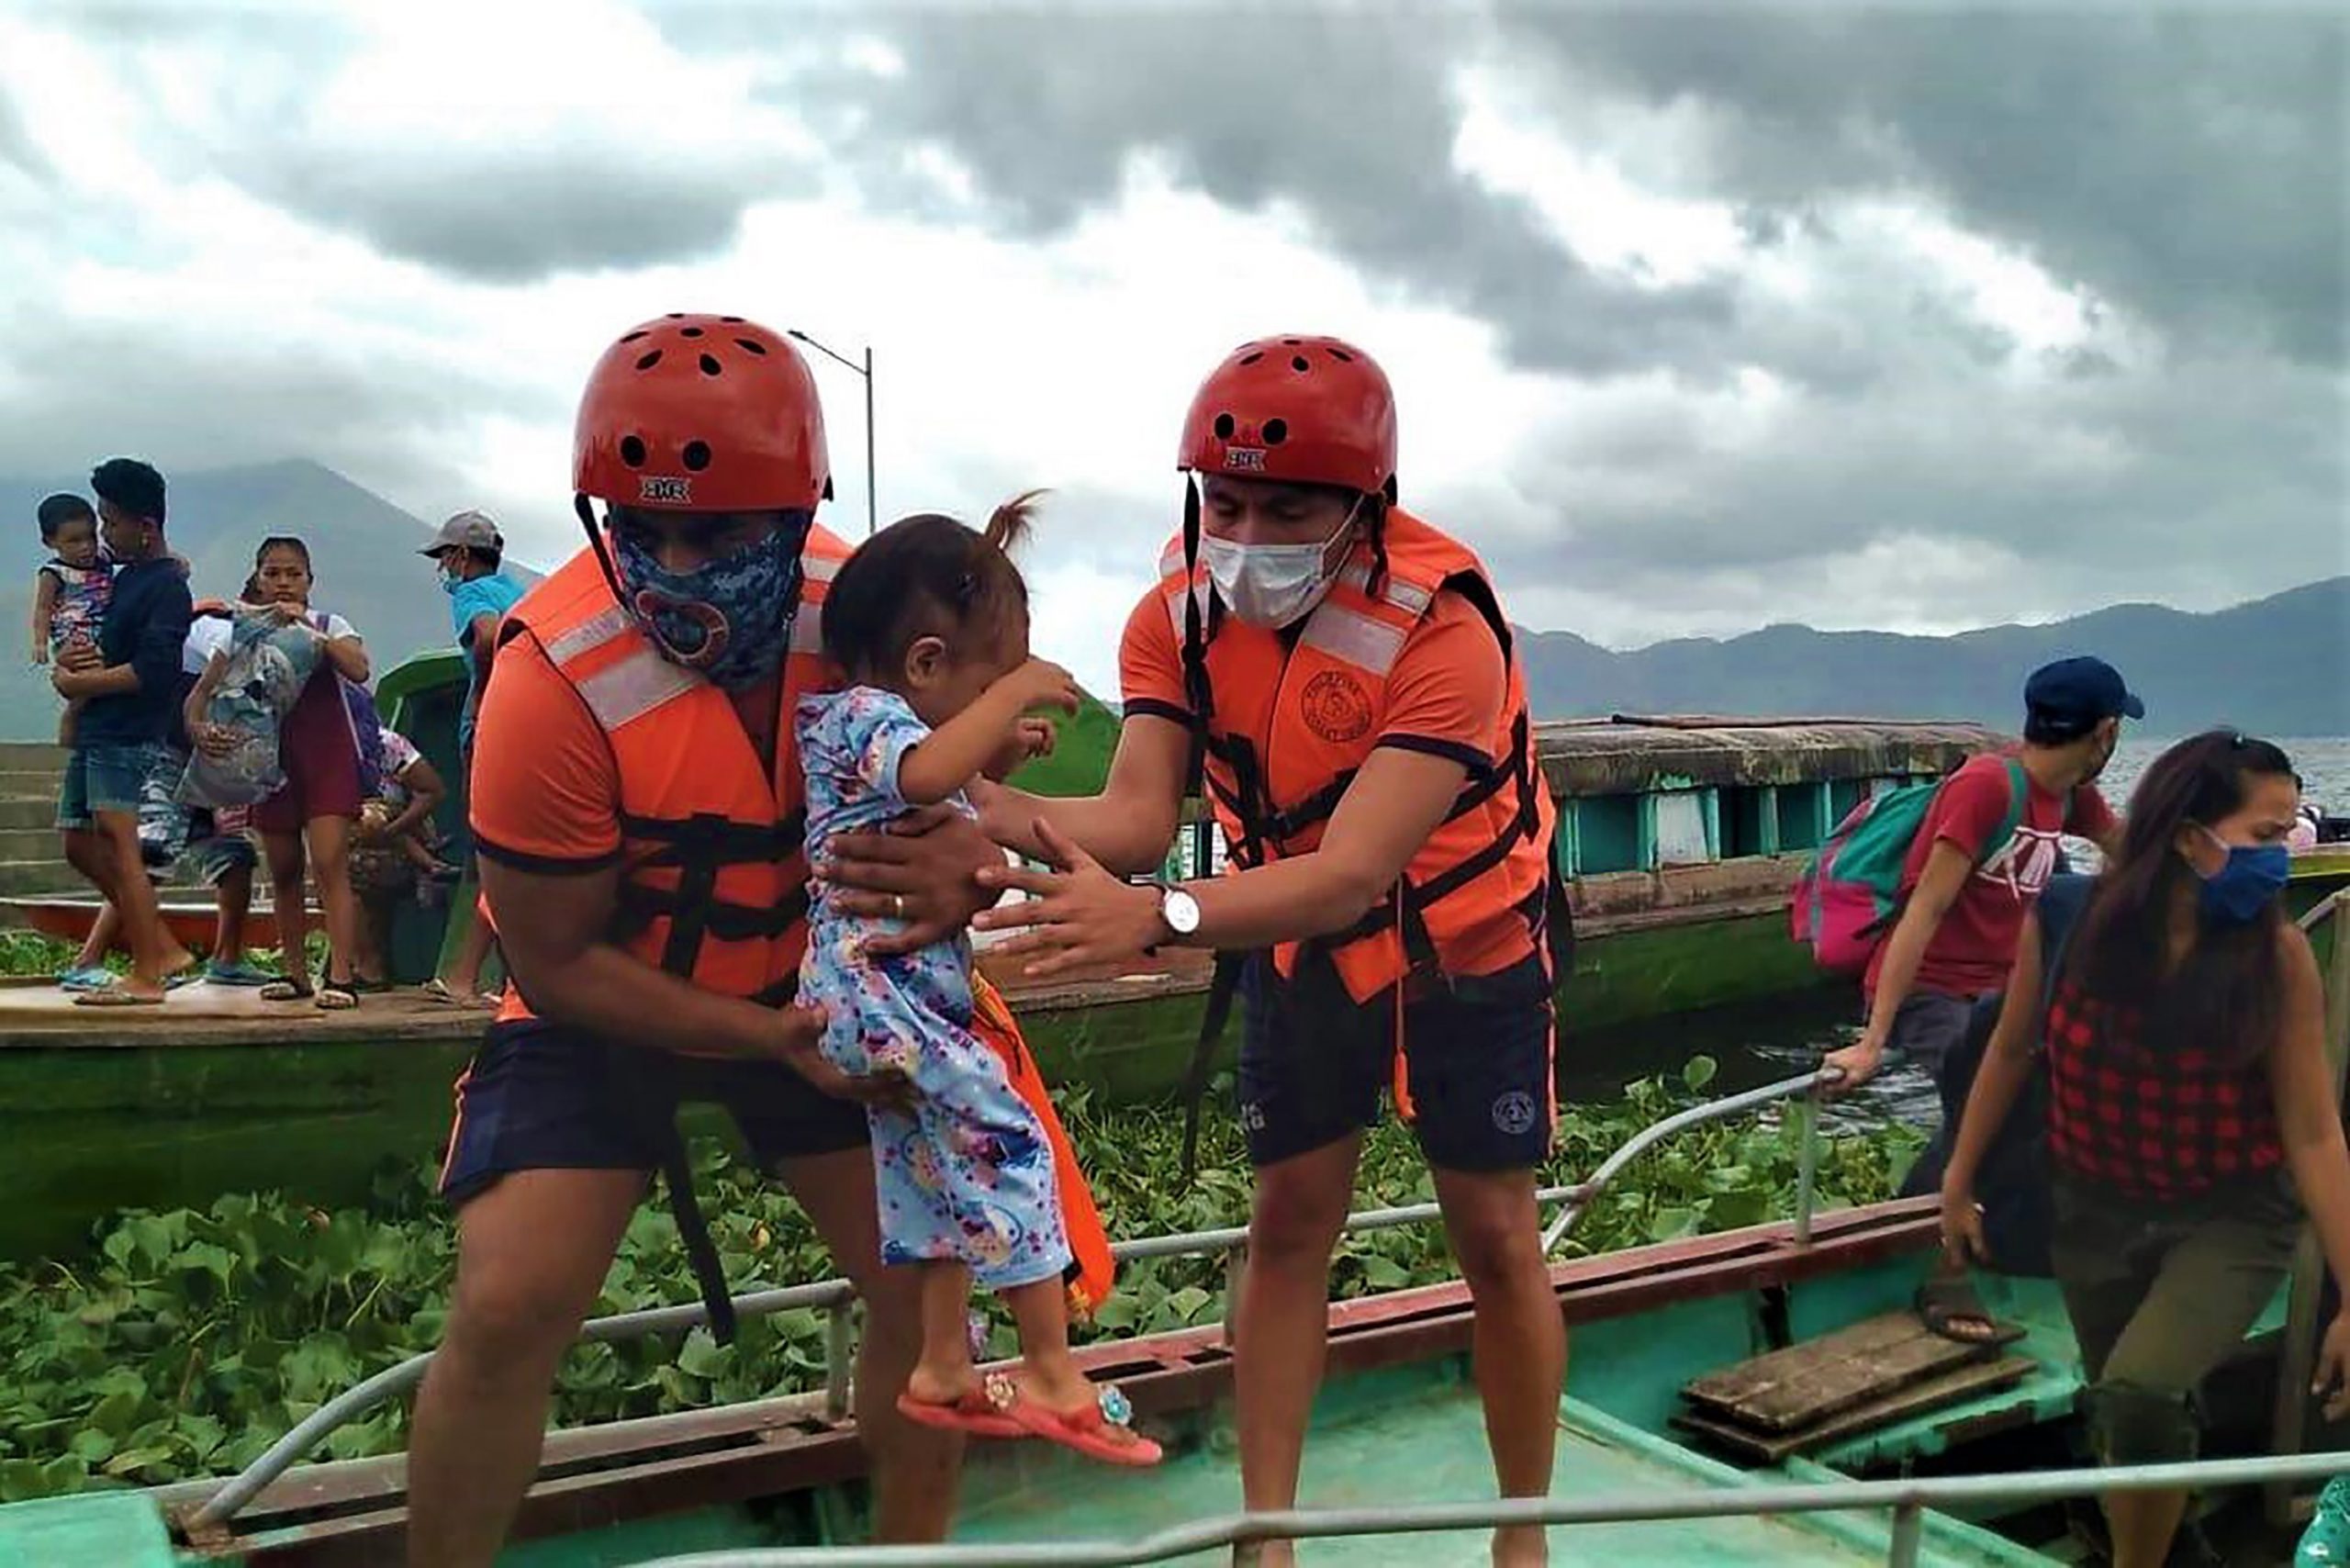 The super typhoon entered the Philippines and displaced 1 million people